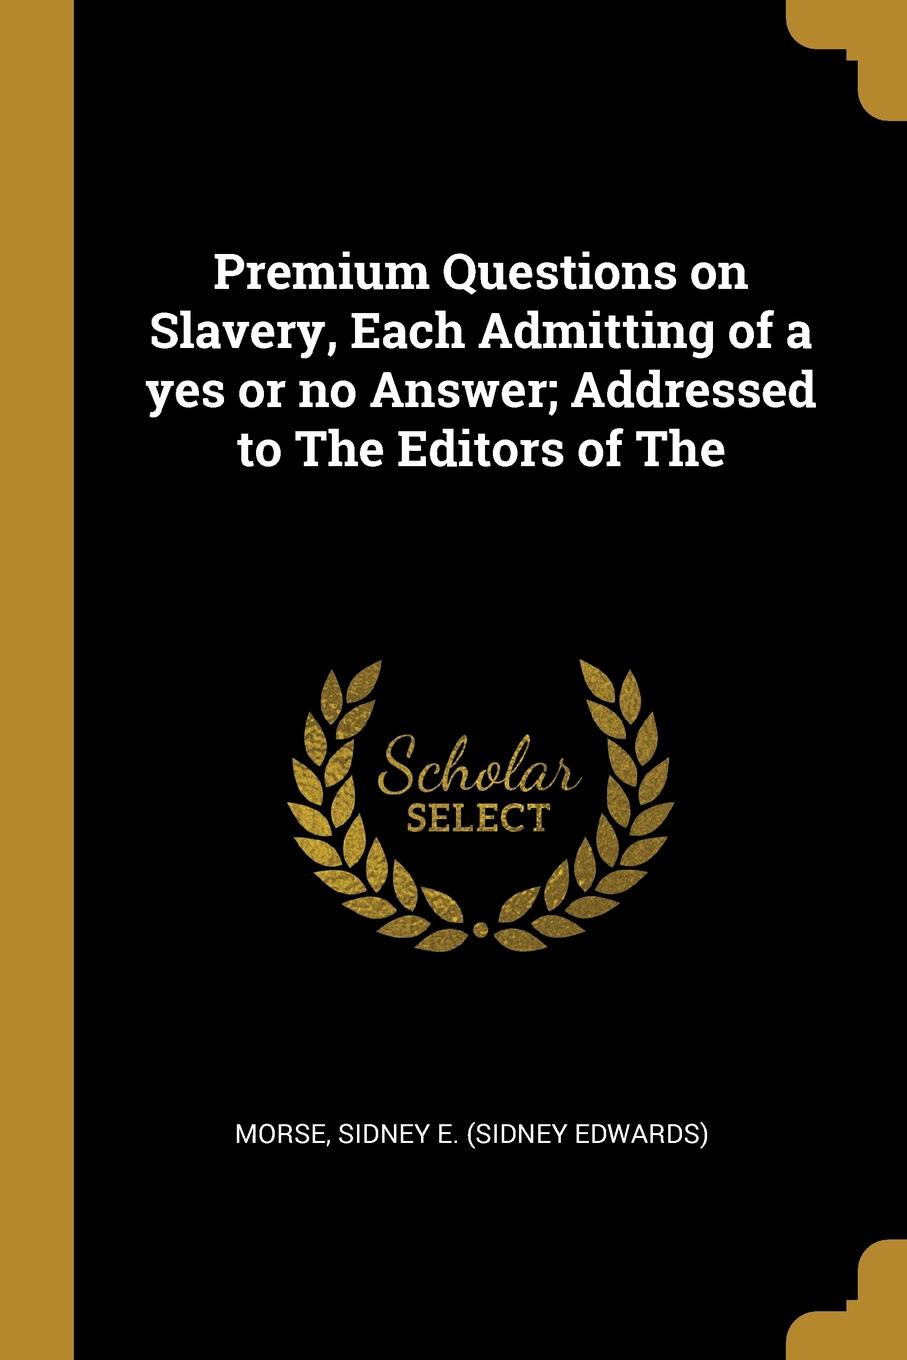 Premium Questions on Slavery, Each Admitting of a yes or no Answer; Addressed to The Editors of The